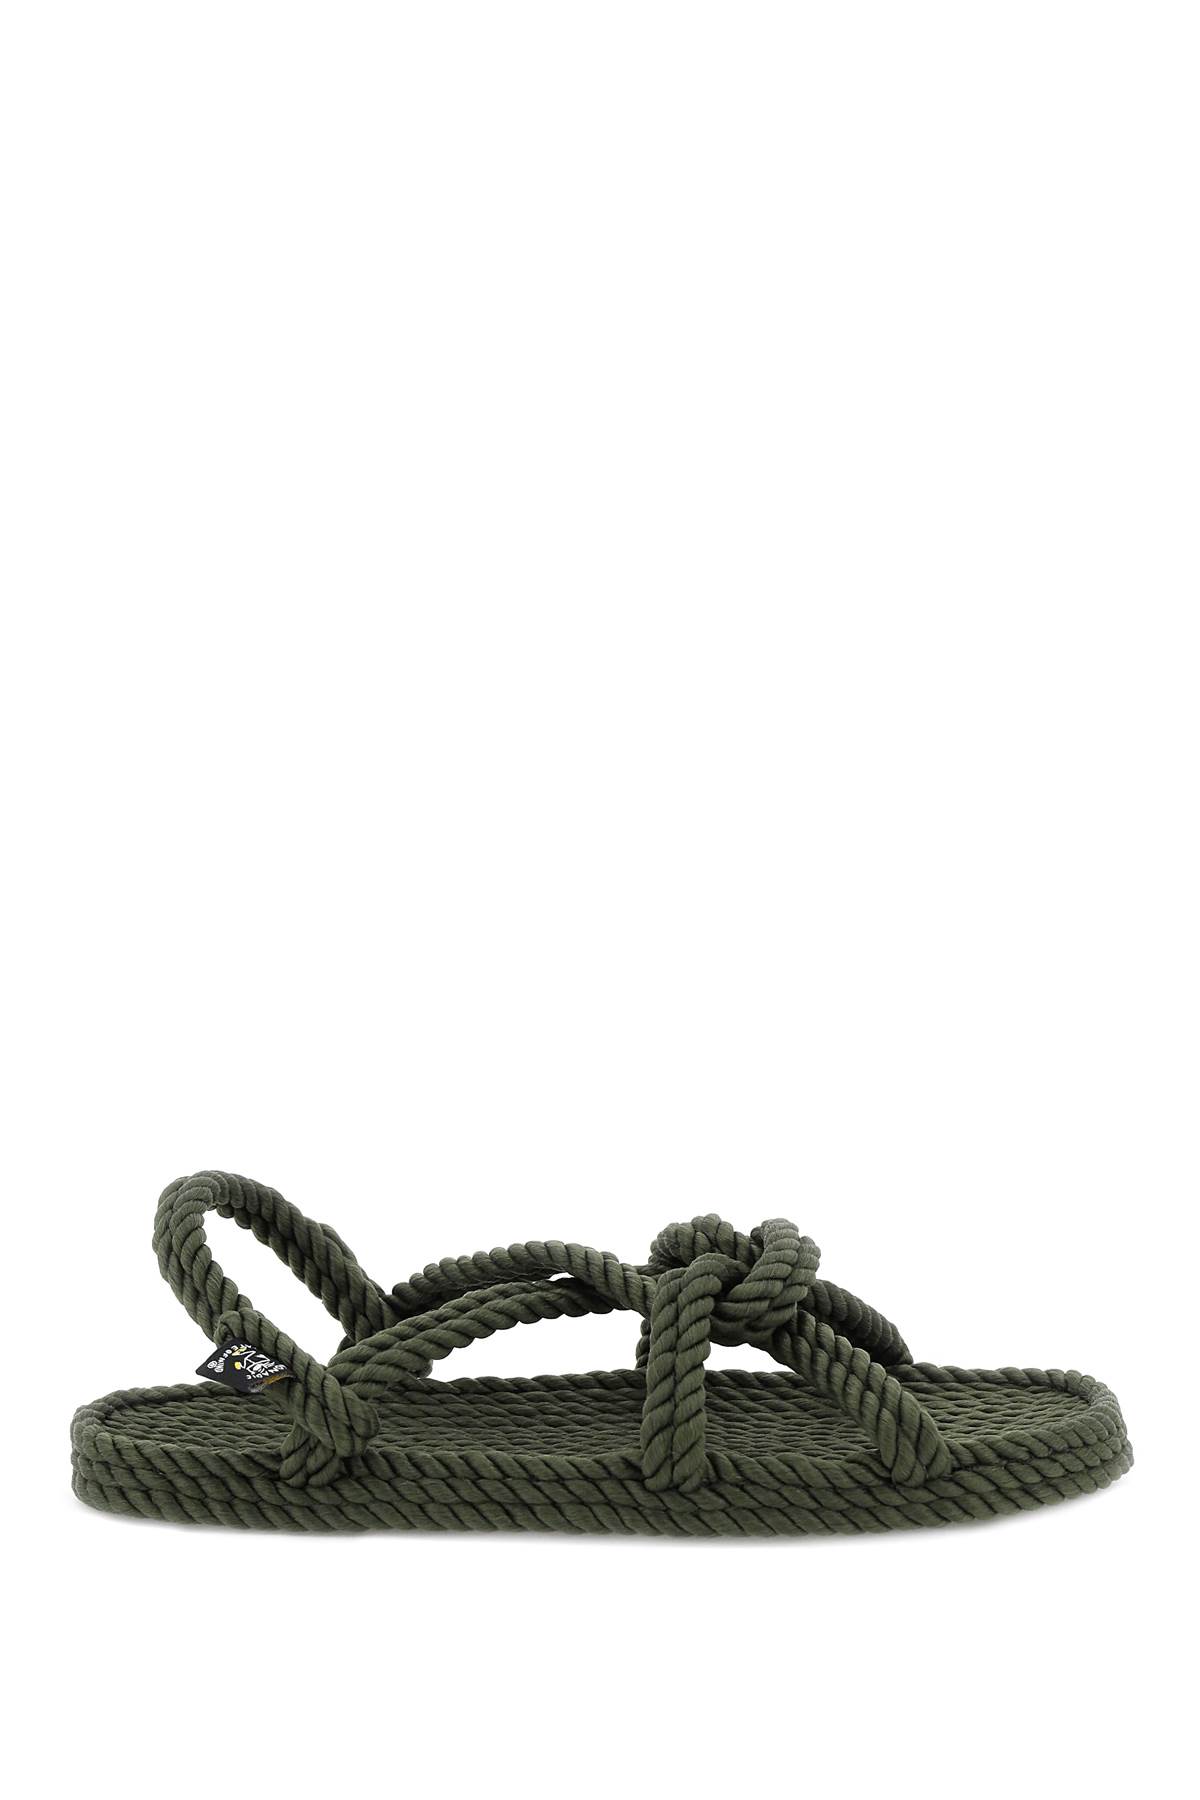 NOMADIC STATE OF MIND MOUNTAIN MOMMA ROPE SANDALS